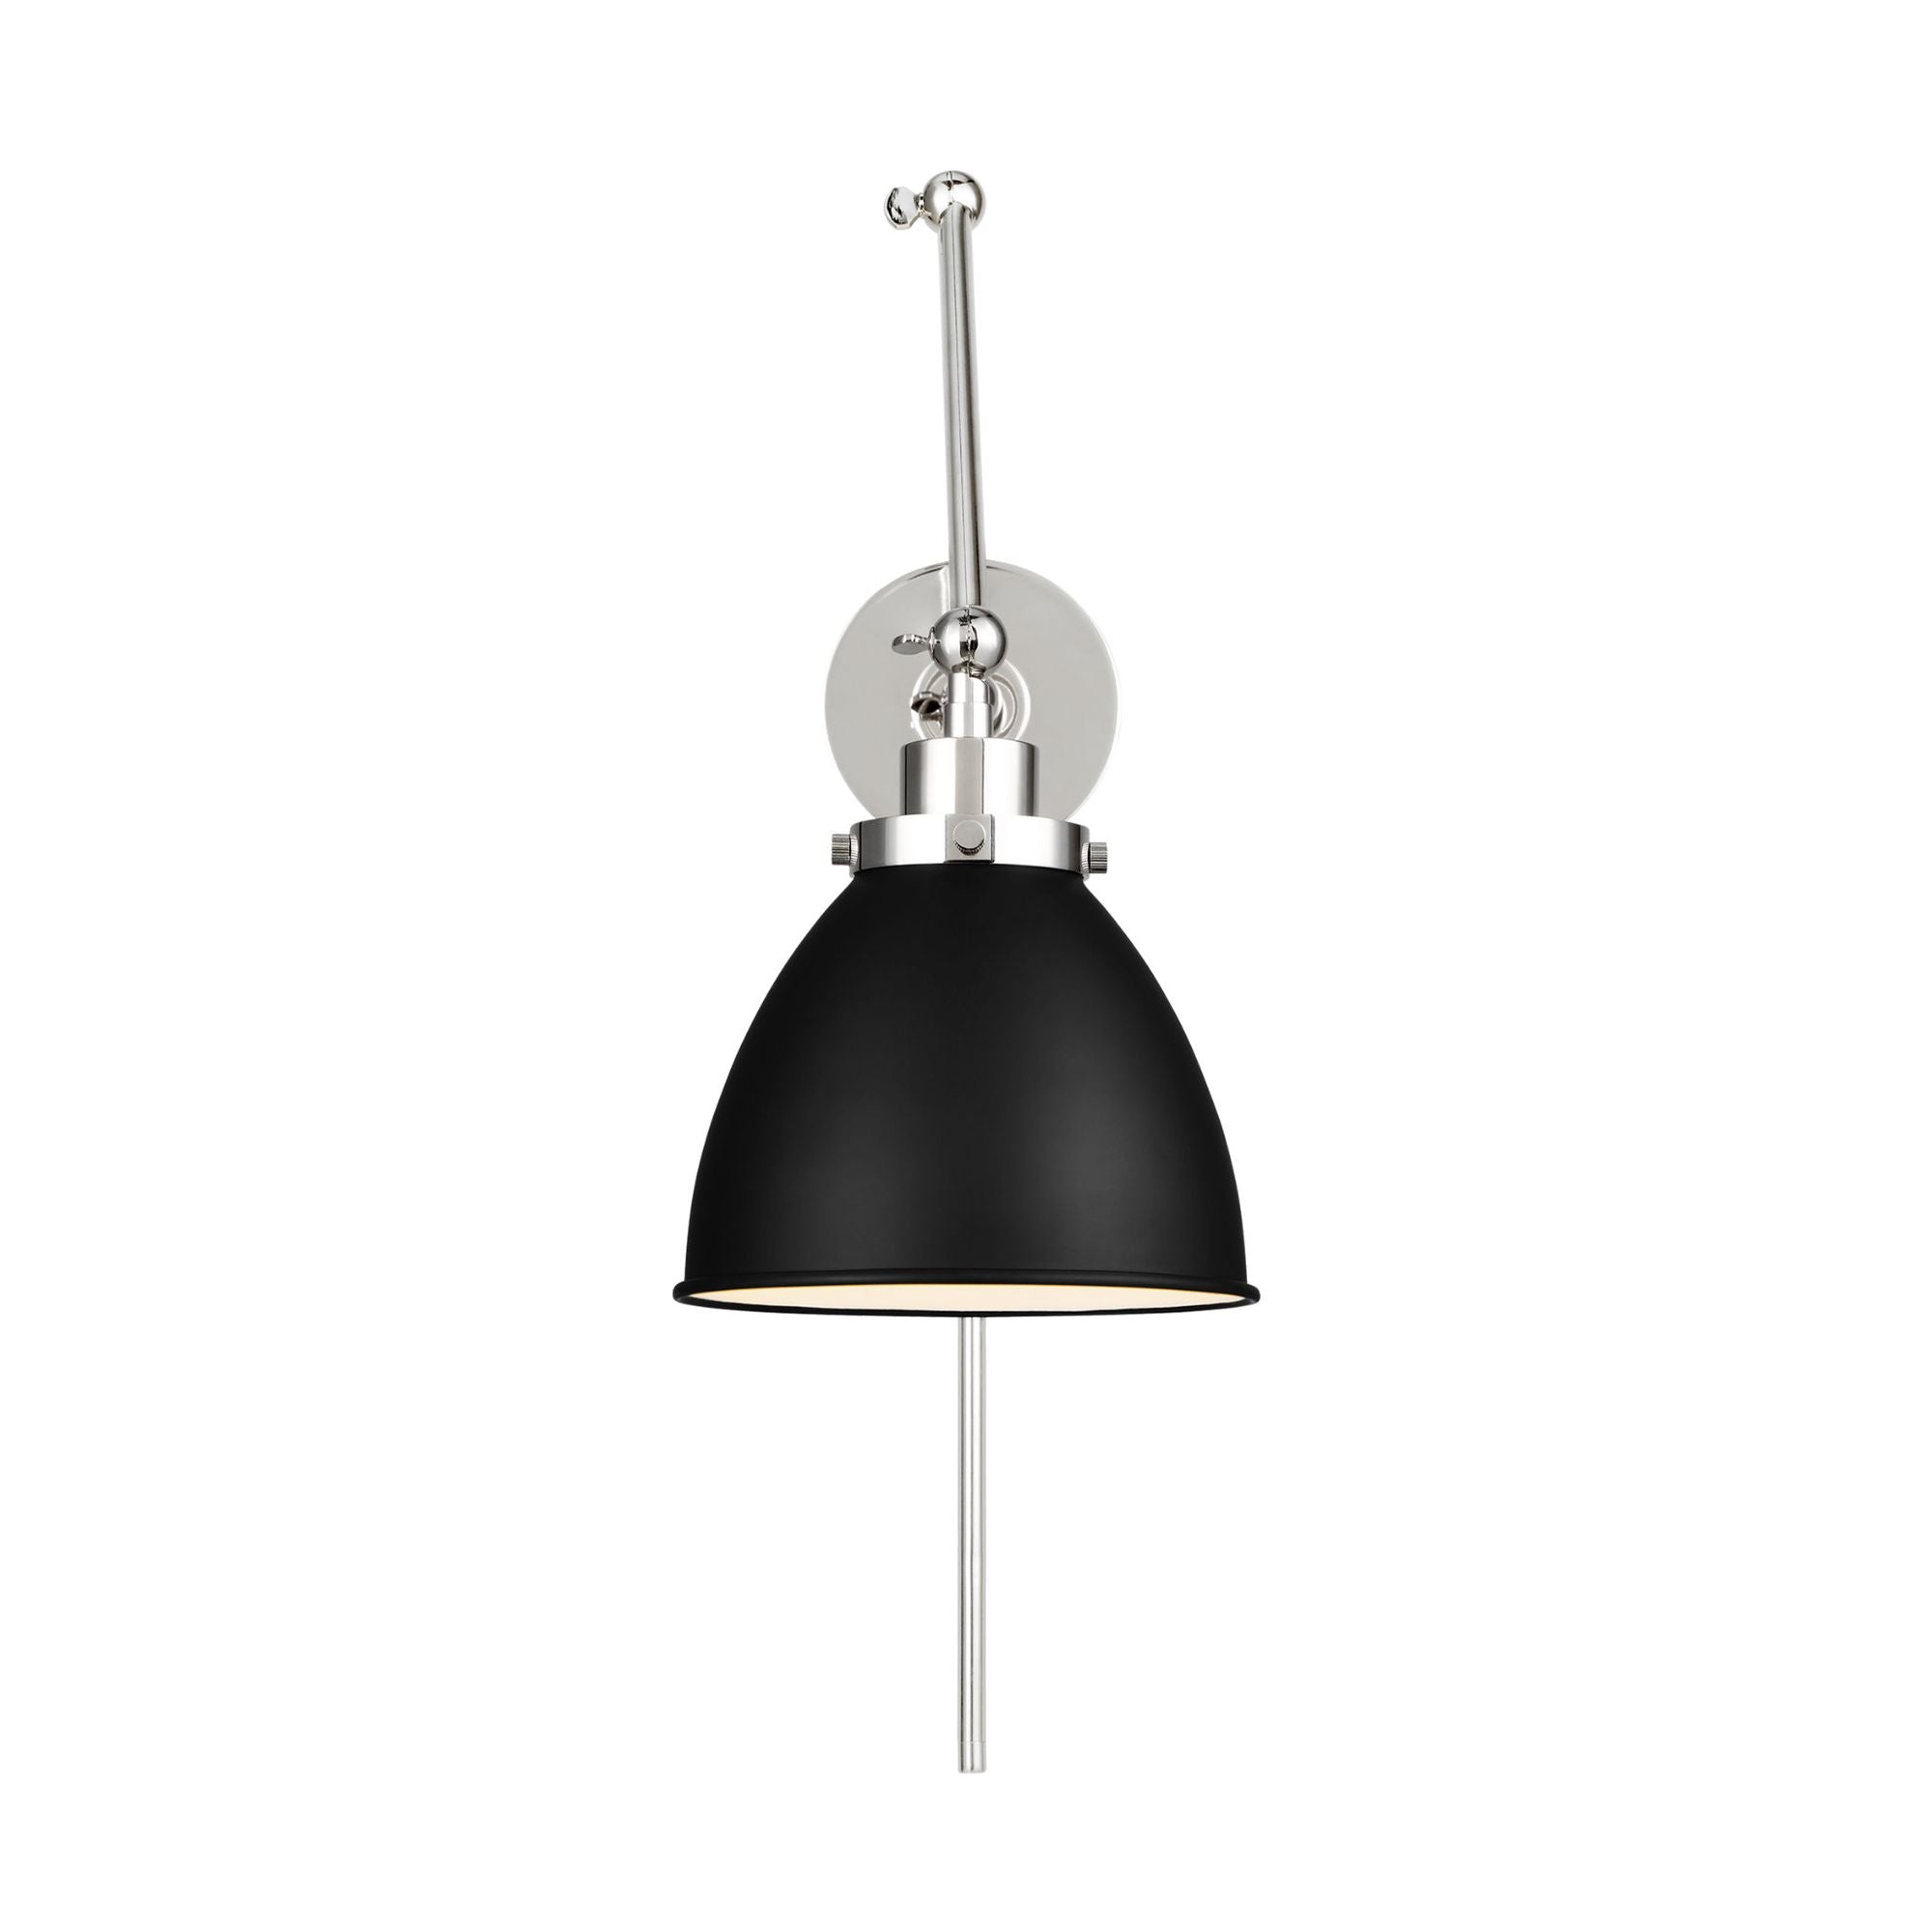 Chapman & Myers Wellfleet Double Arm Dome Task Sconce in Midnight Black and Polished Nickel